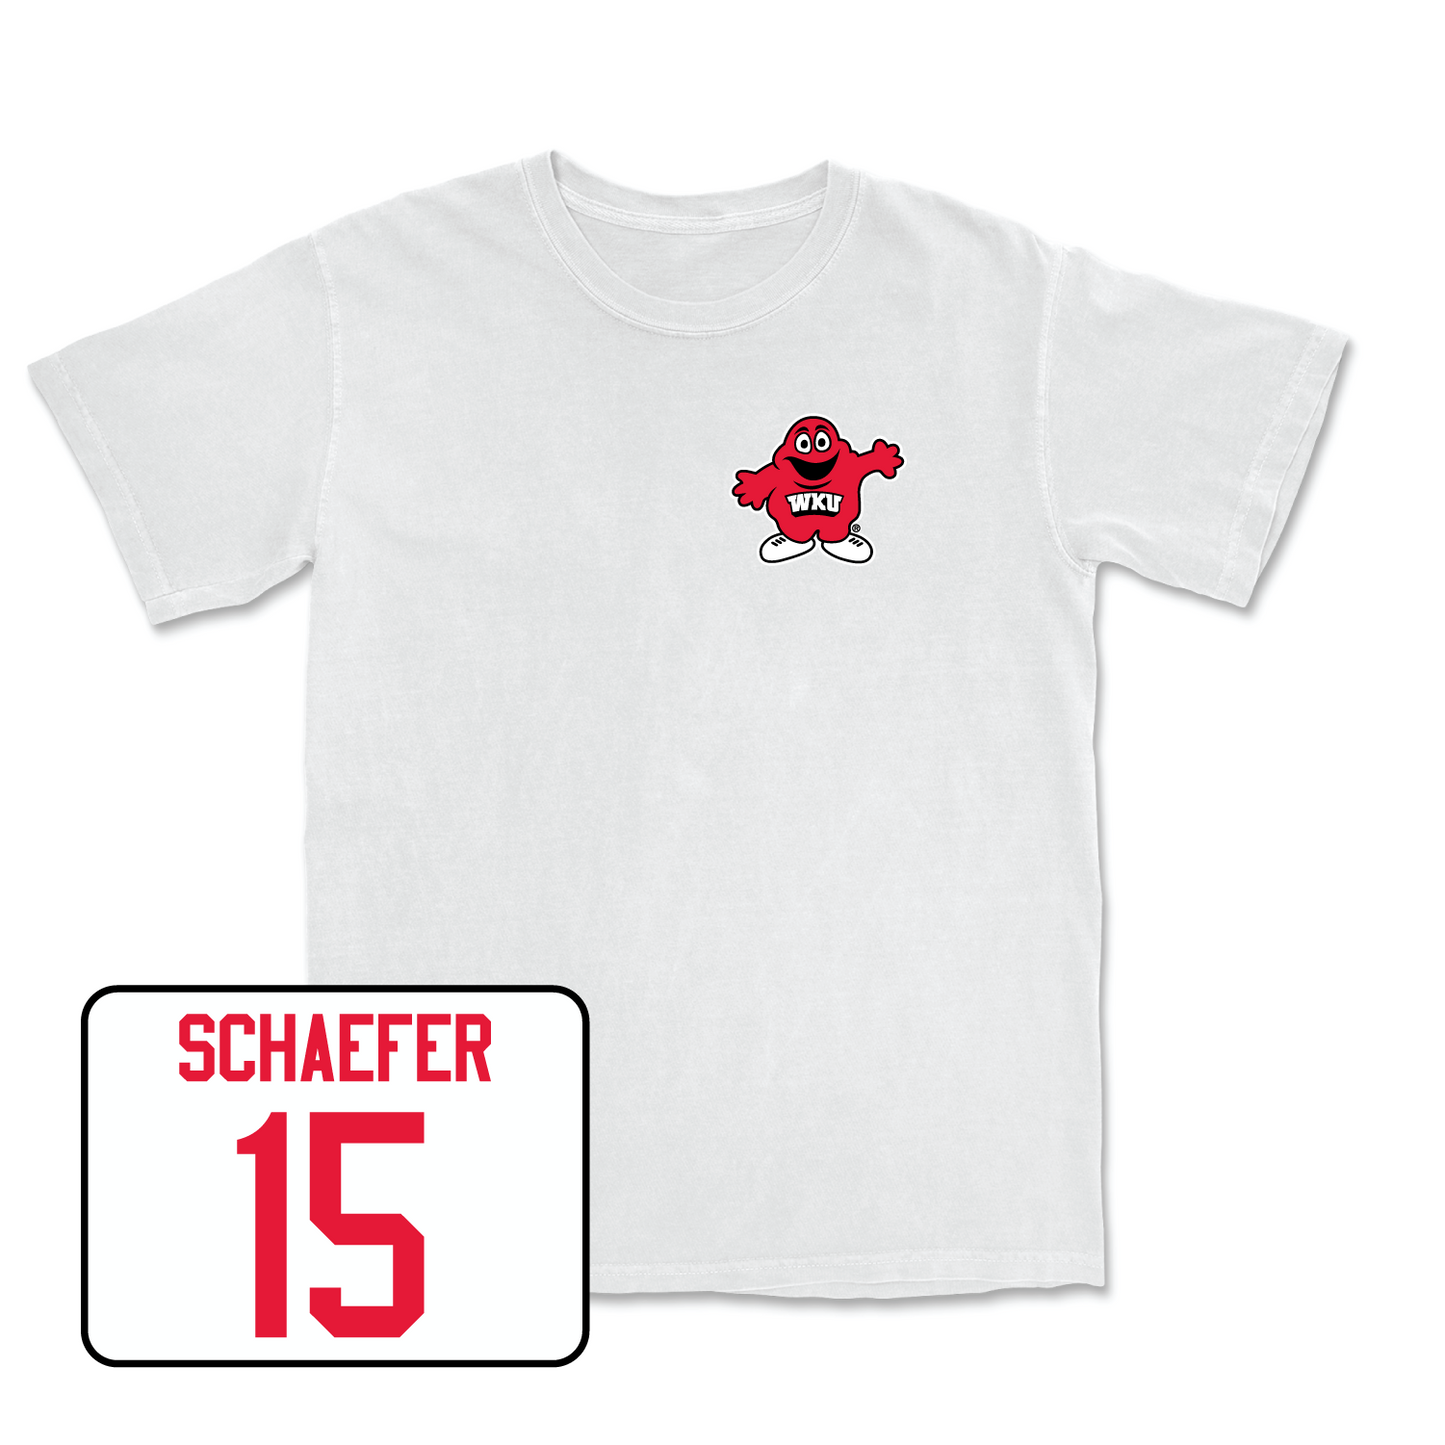 White Women's Volleyball Big Red Comfort Colors Tee Youth Medium / Abigail Schaefer | #15